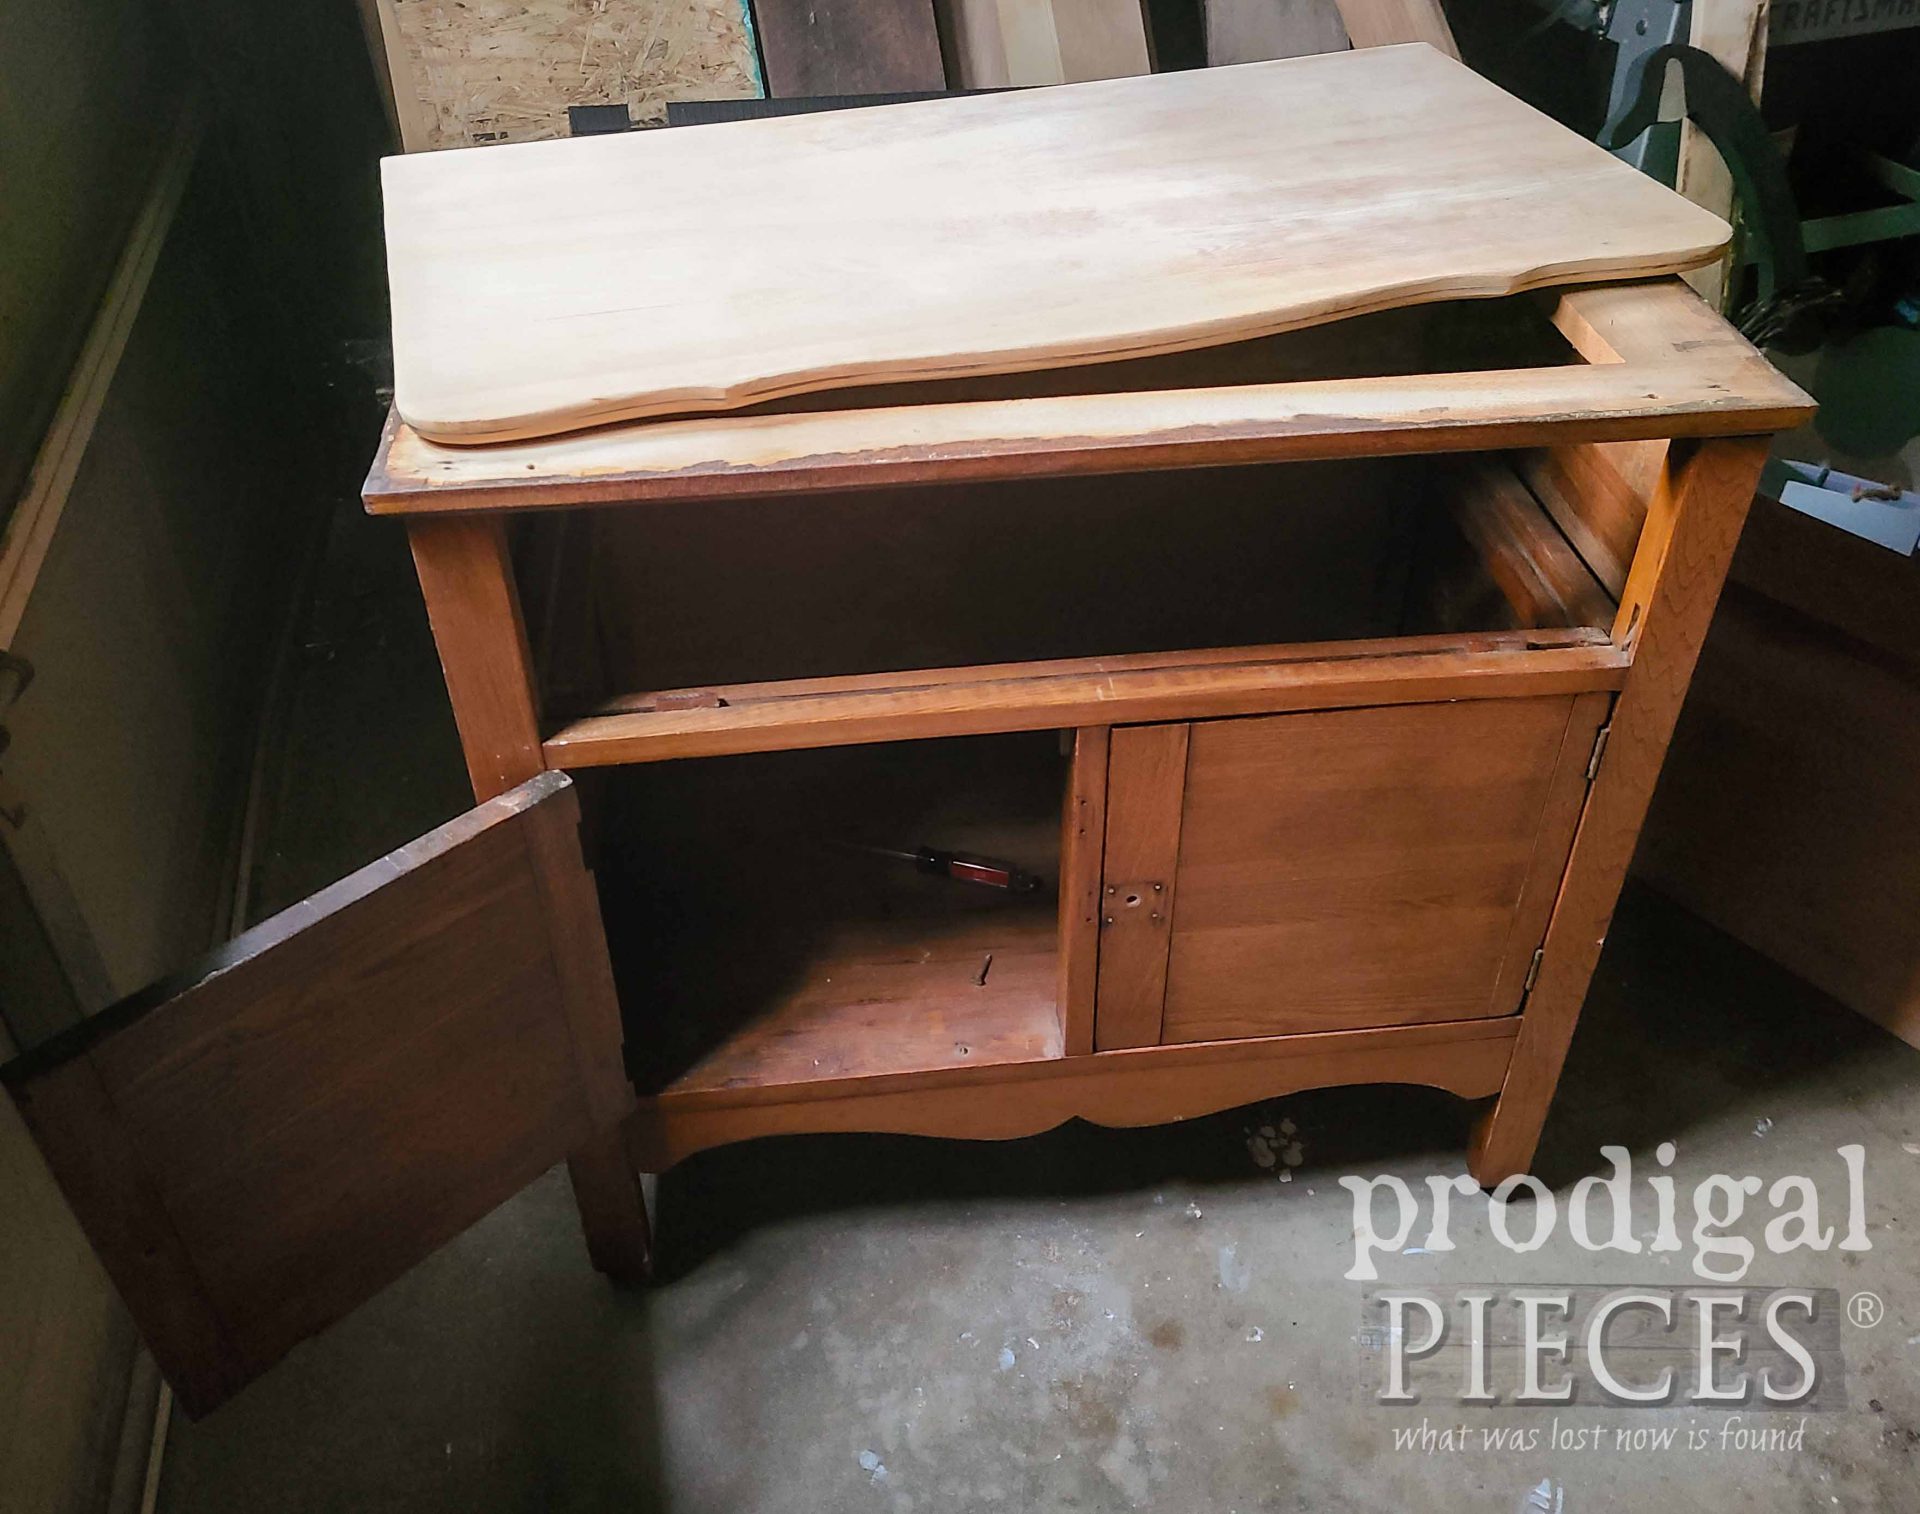 Disassembled Wash Stand | prodigalpieces.com